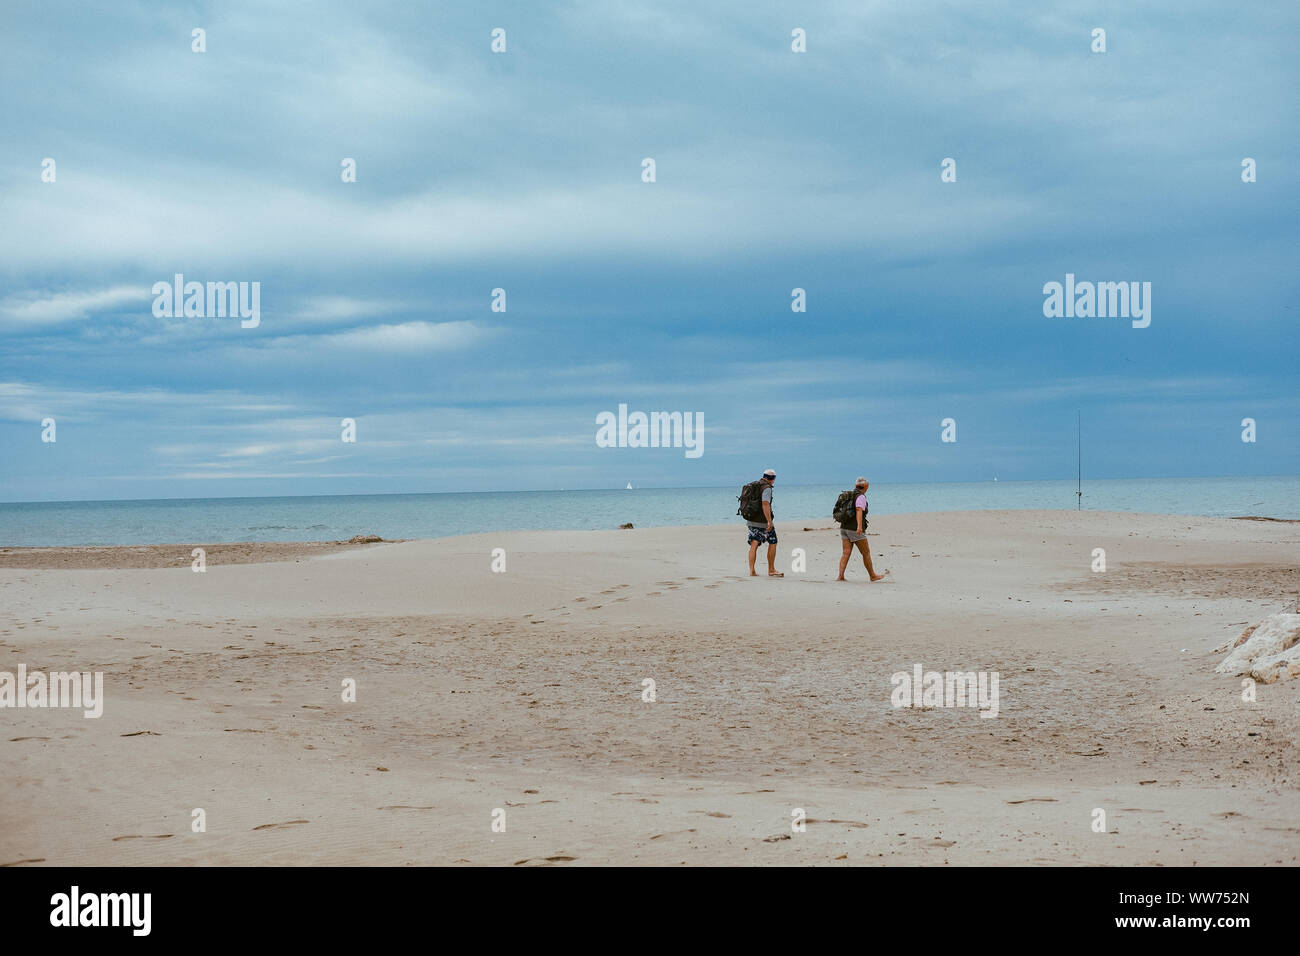 On a beach in the natural paradise Camargue in the south of France Stock Photo